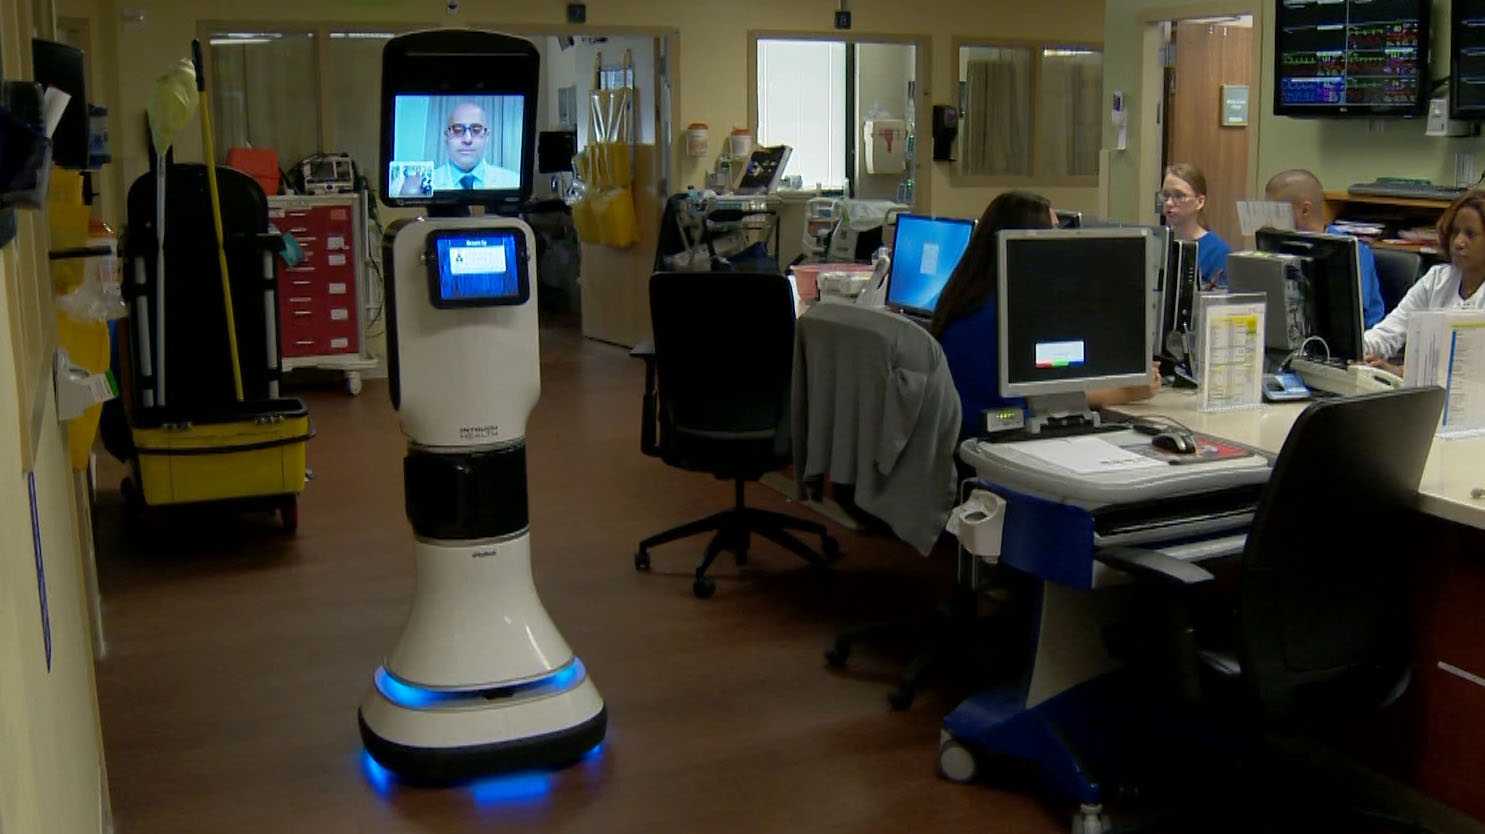 Hospital using 'RoboDocs' to interact with patients